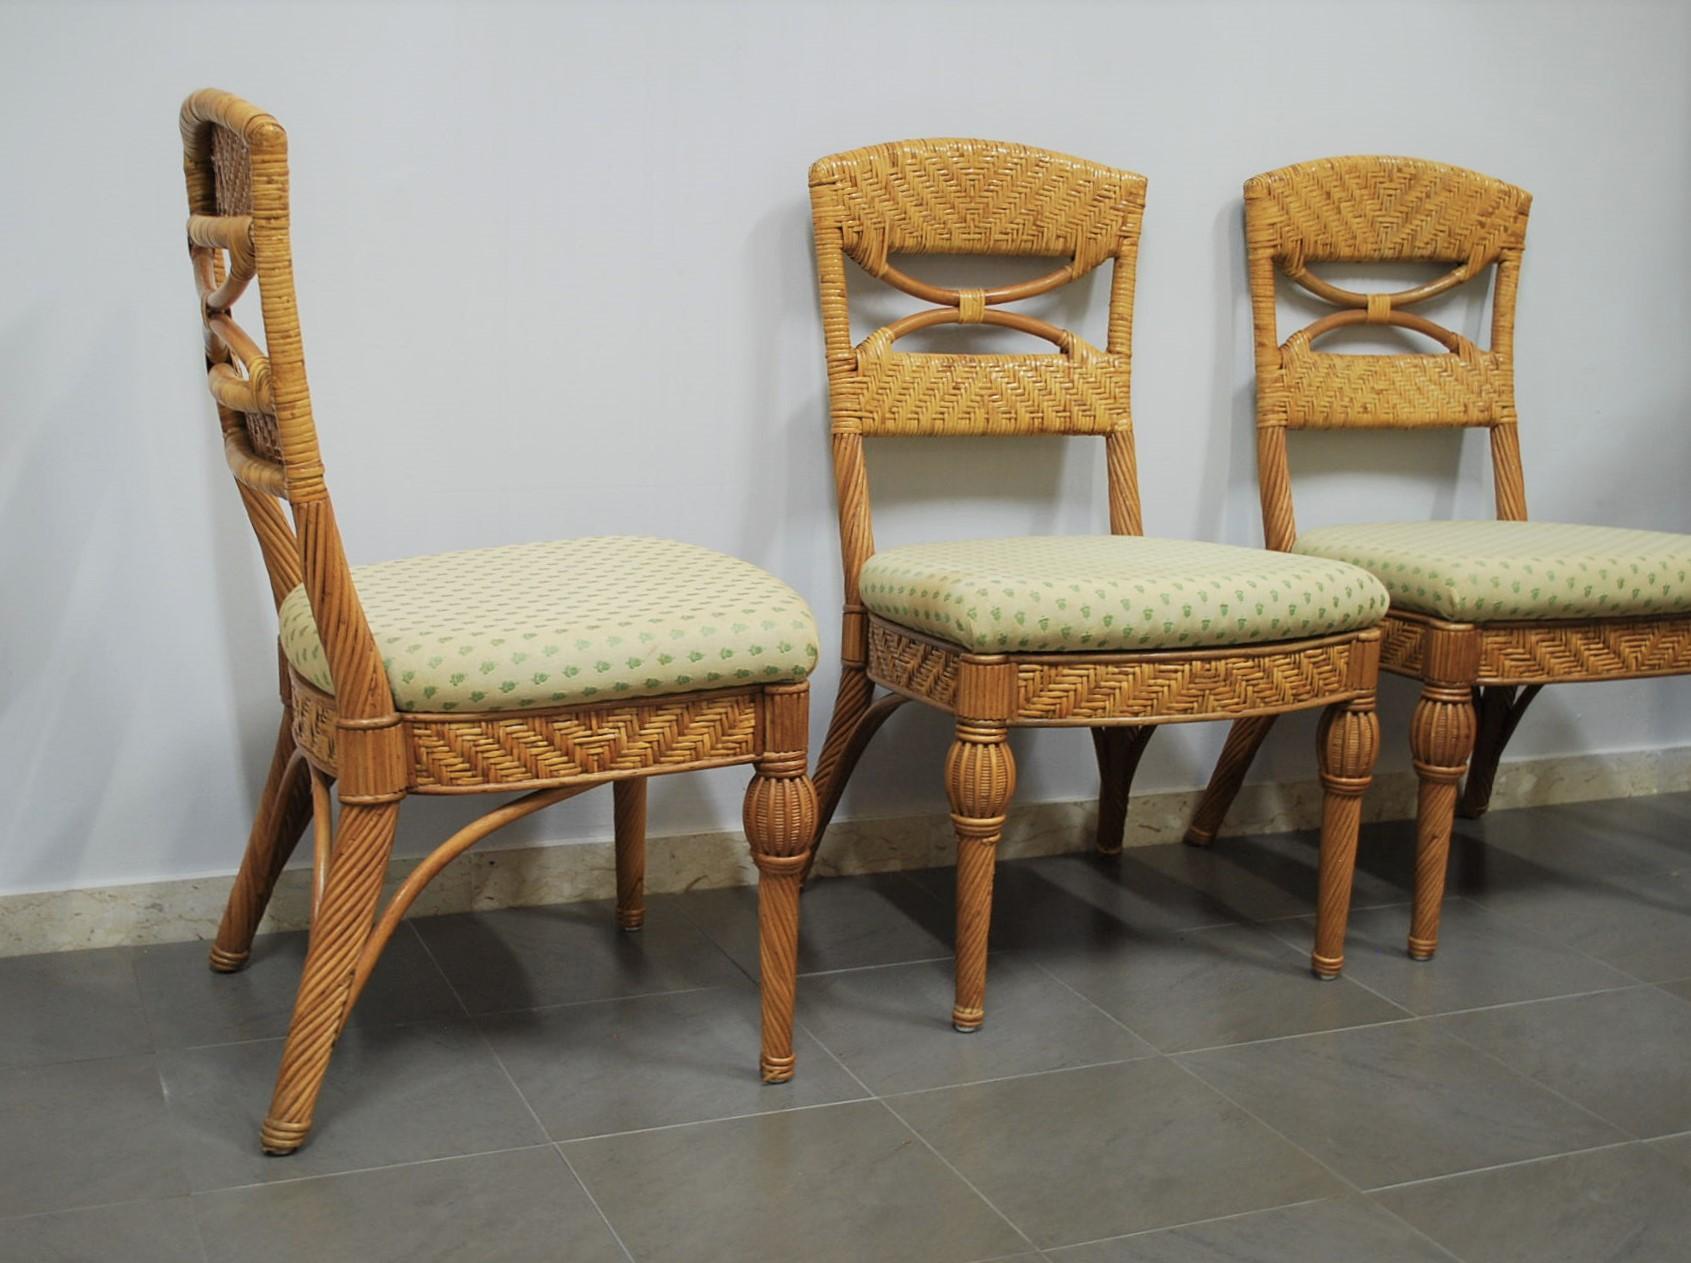 20th Century Dining Room Chairs Wicker Fabric Vivai del Sud Midcentury Italy 1980s Set of 4 For Sale